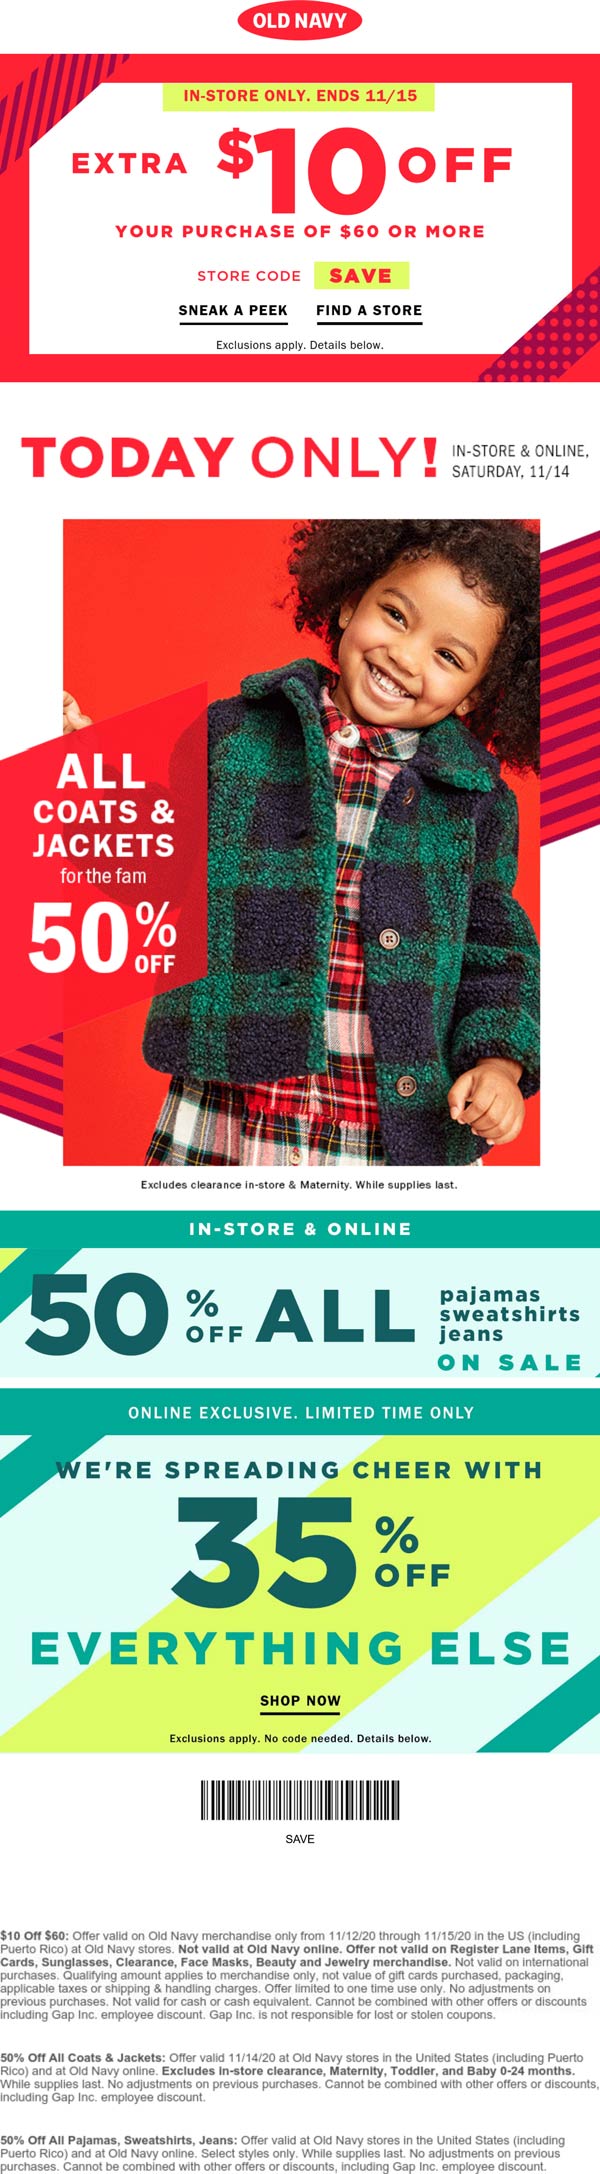 Old Navy stores Coupon  $10 off $60 & more at Old Navy, or 35% off everything online #oldnavy 